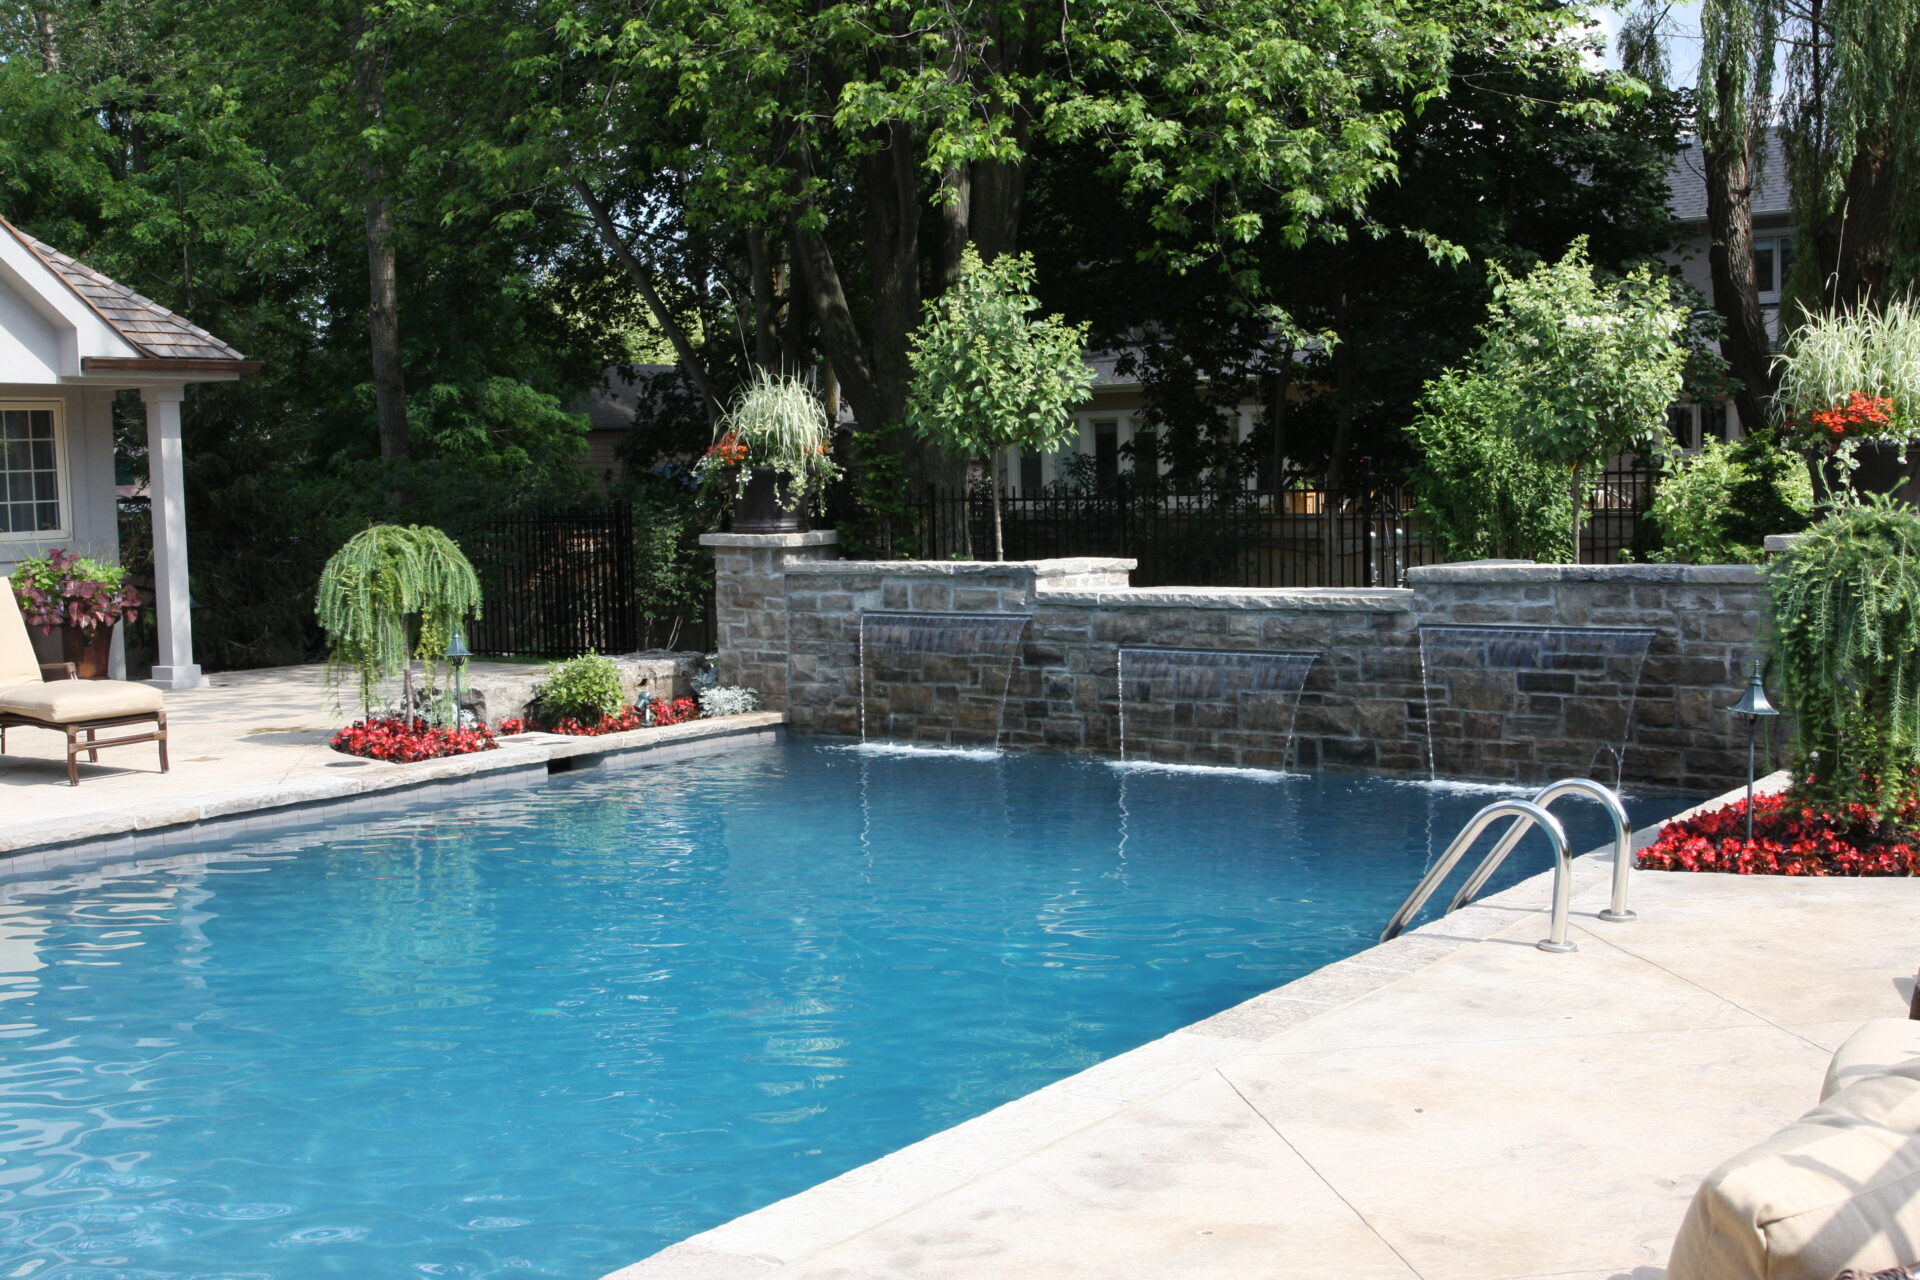 An outdoor swimming pool with a stone waterfall feature, surrounded by lounging chairs, plants, and a fence, in a landscaped backyard setting.